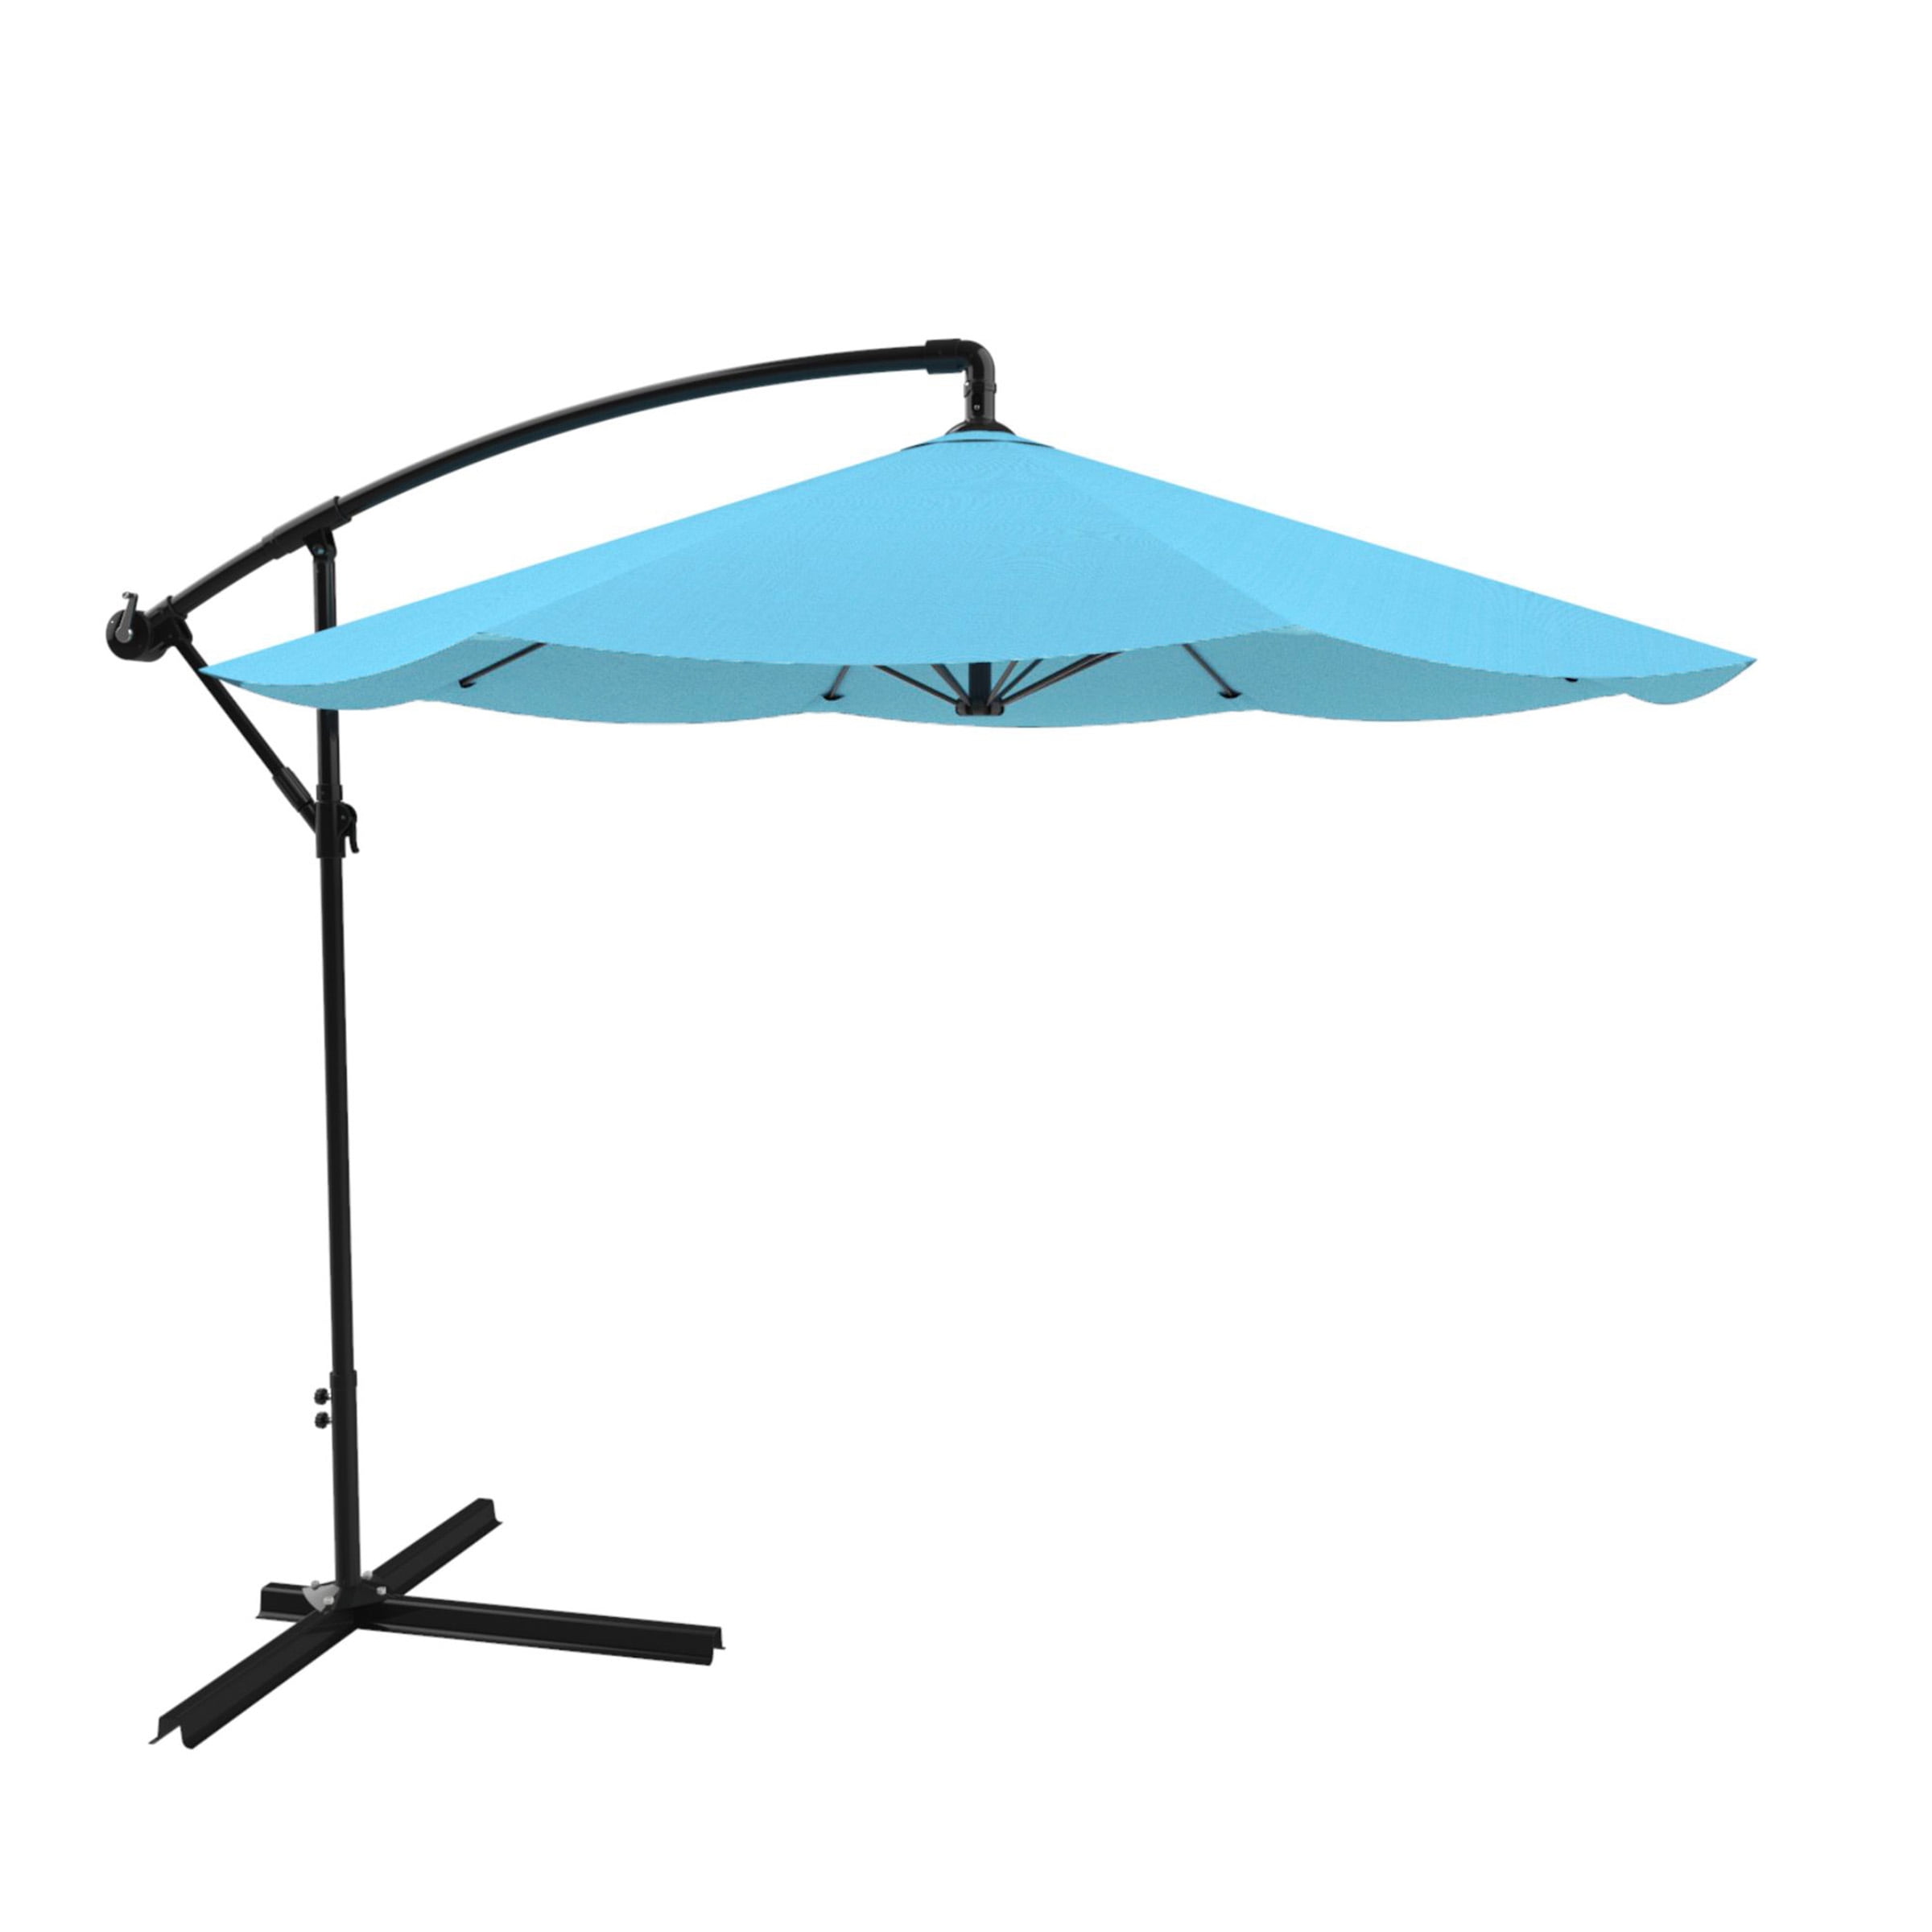 Details about   10FT Offset Cantilever Patio Hanging Umbrella Outdoor Table Umbrella Sun Shade 